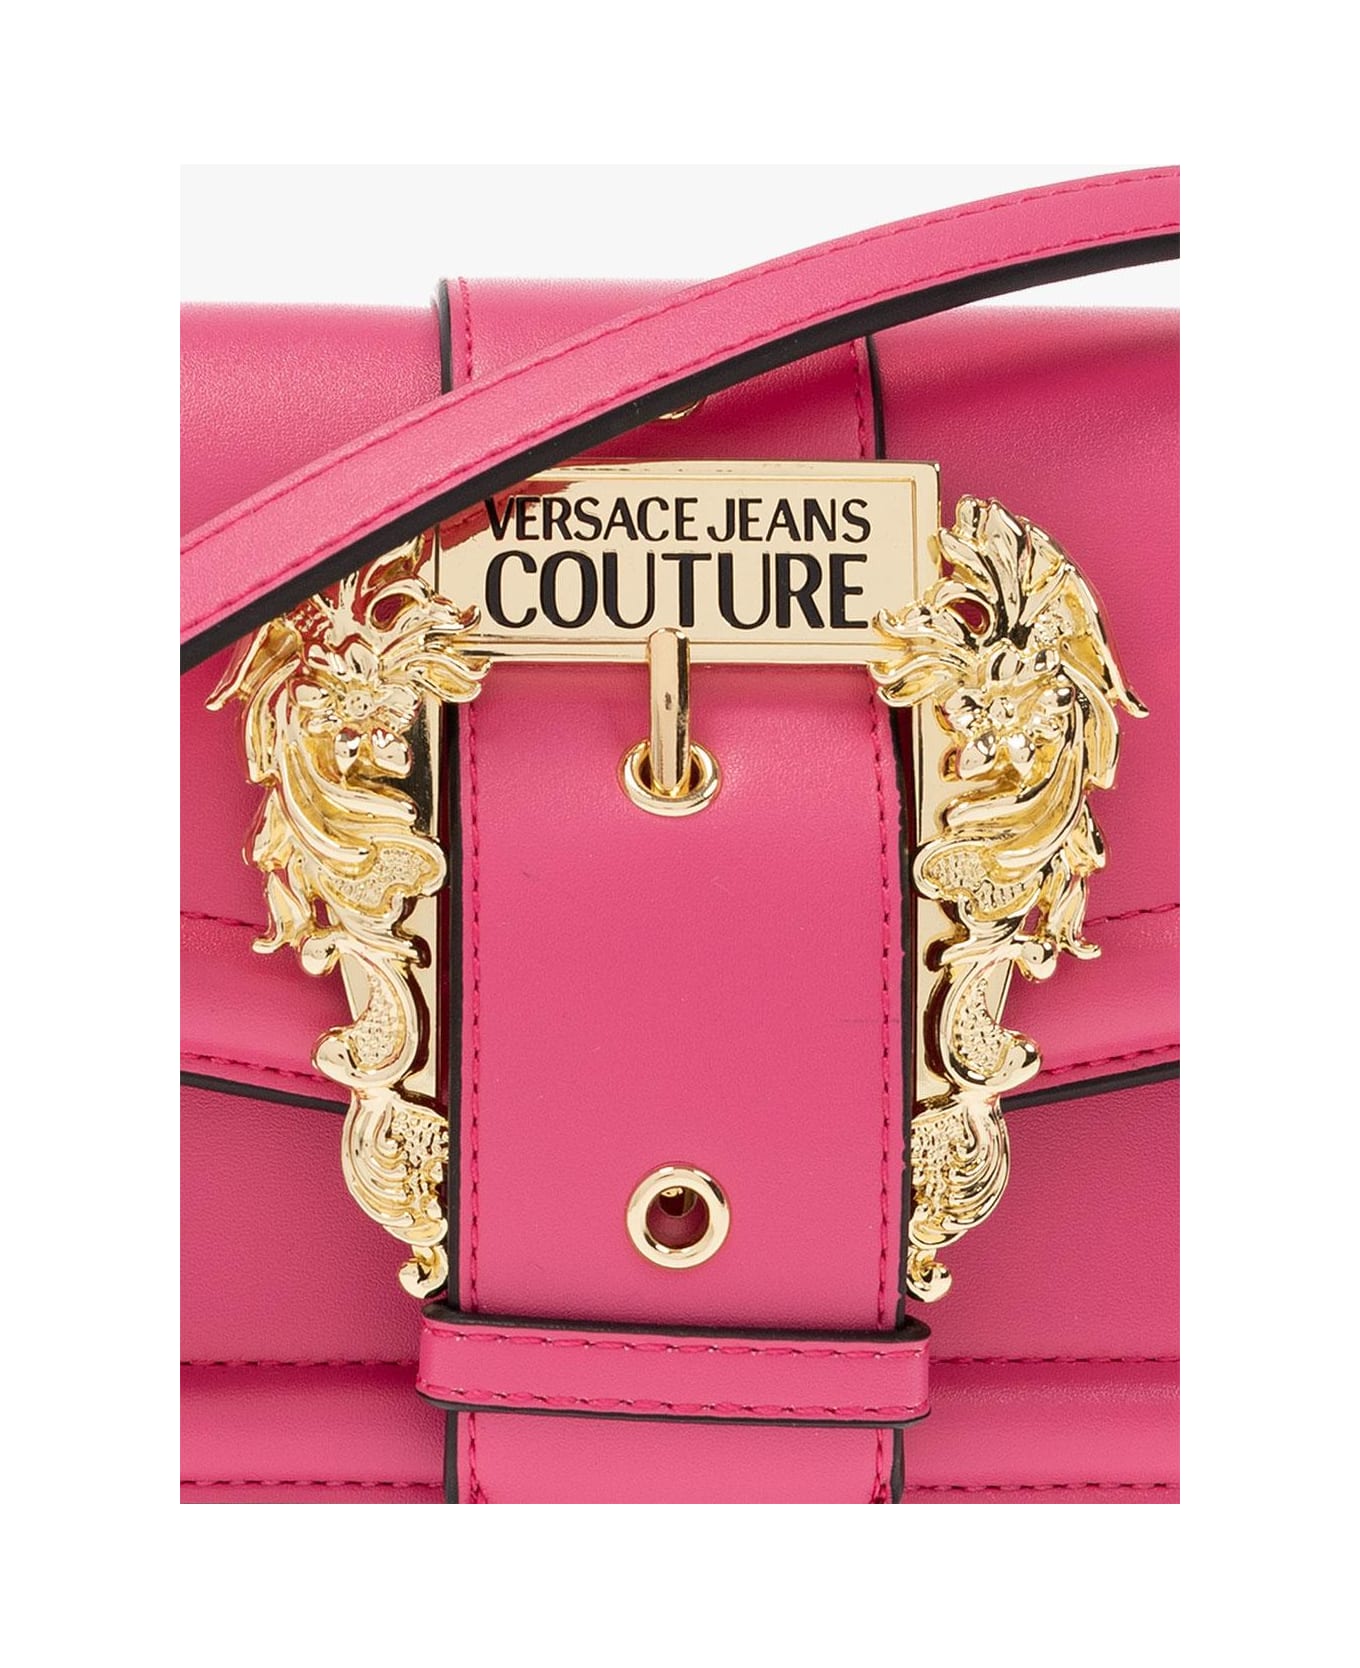 Versace Jeans Couture Shoulder Bag In Rose-pink Faux Leather - Fucsia